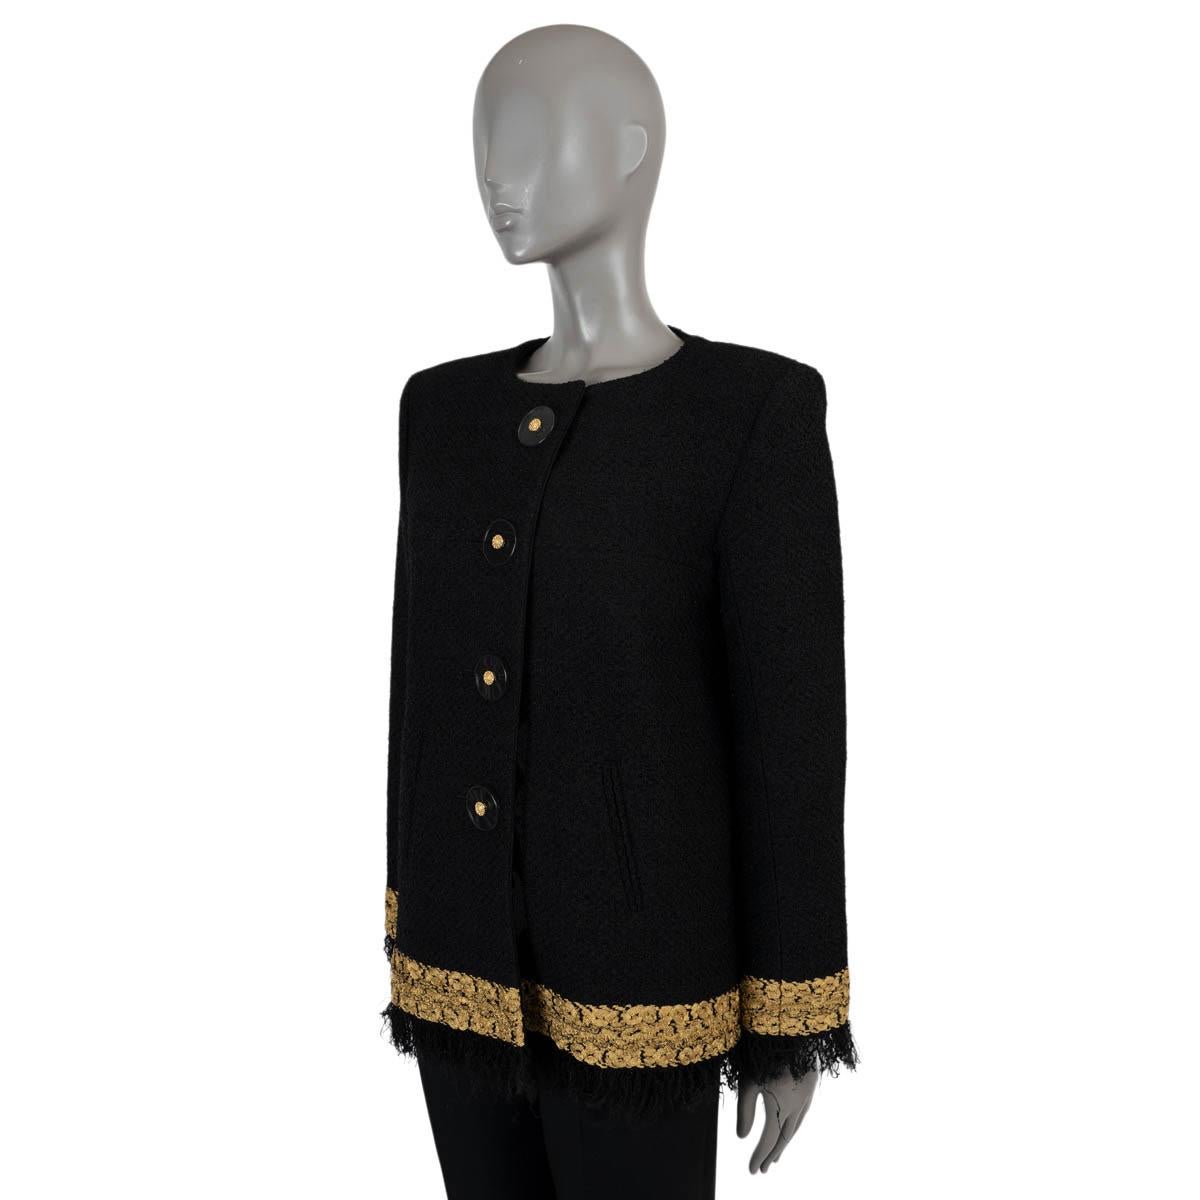 100% authentic Chanel tweed jacket in black rayon (46%), nylon (46%), cotton (4%) and polyester (4%). This masterpiece is adorned with gold metallic embroidery and delicate fringe trim along the cuffs and bottom hem. Features a collarless, boxy